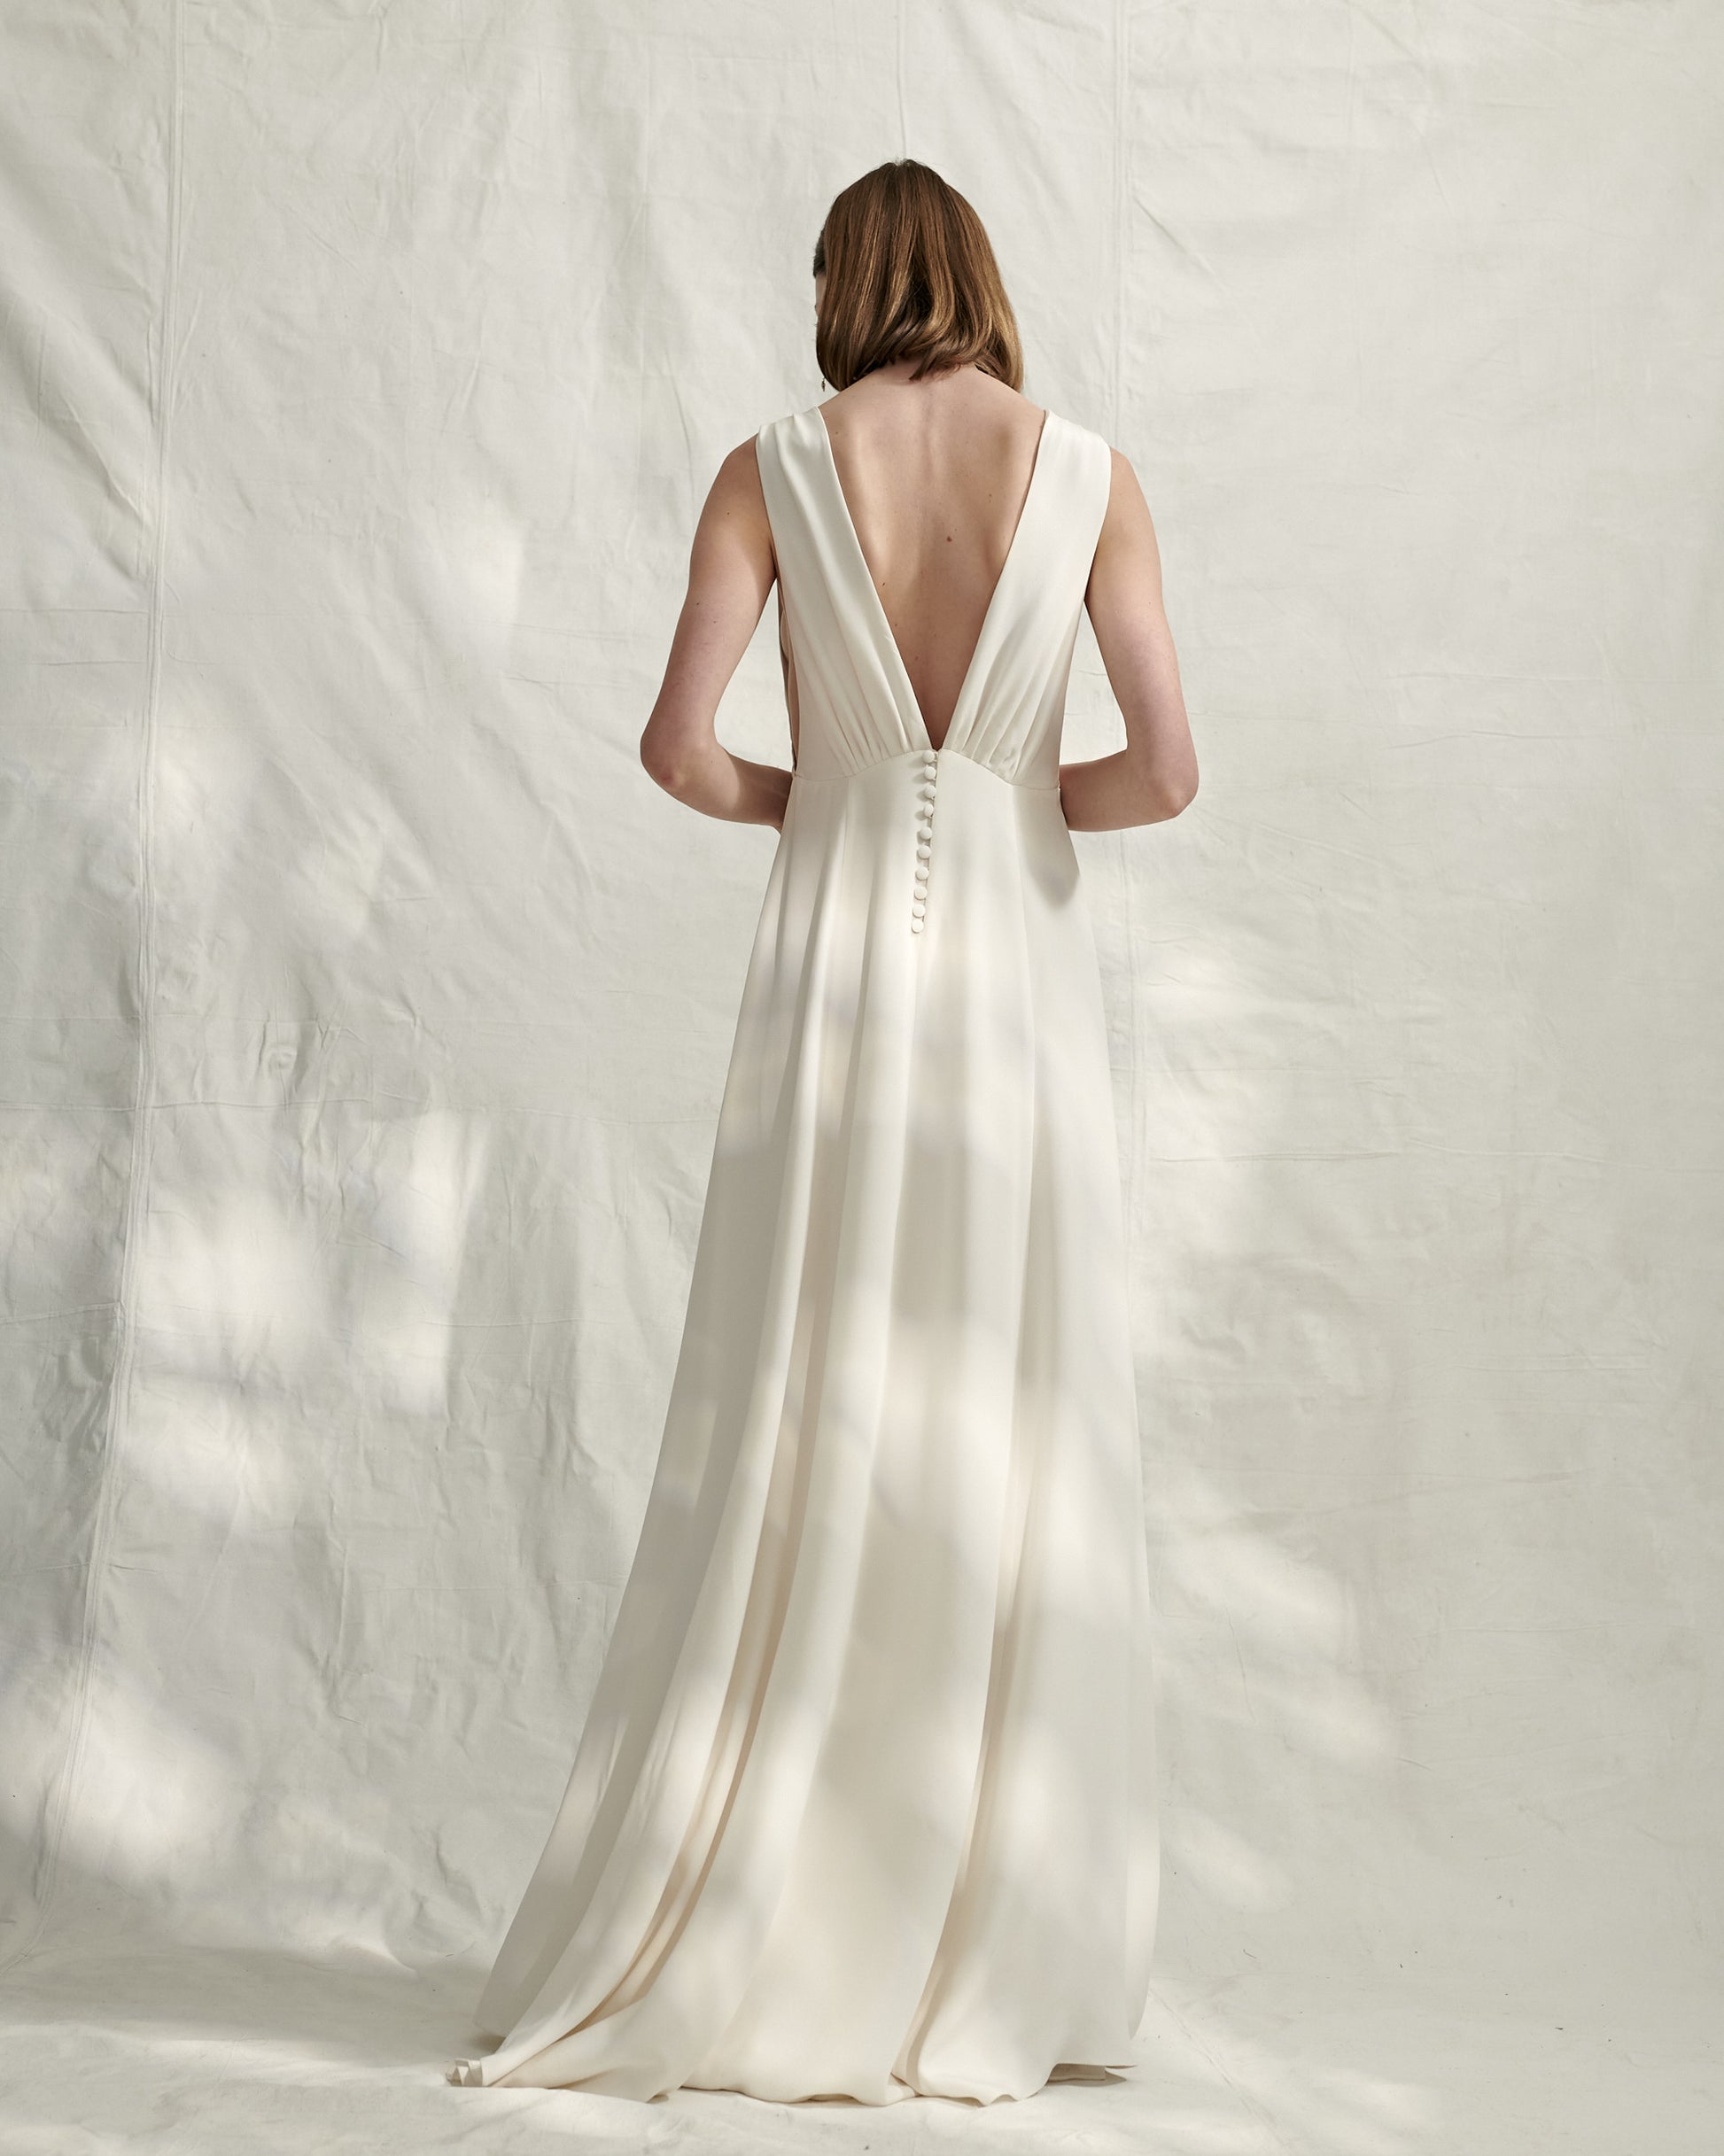 French designer silk crepe wedding gown with plunge neckline both front and back with optional belt.